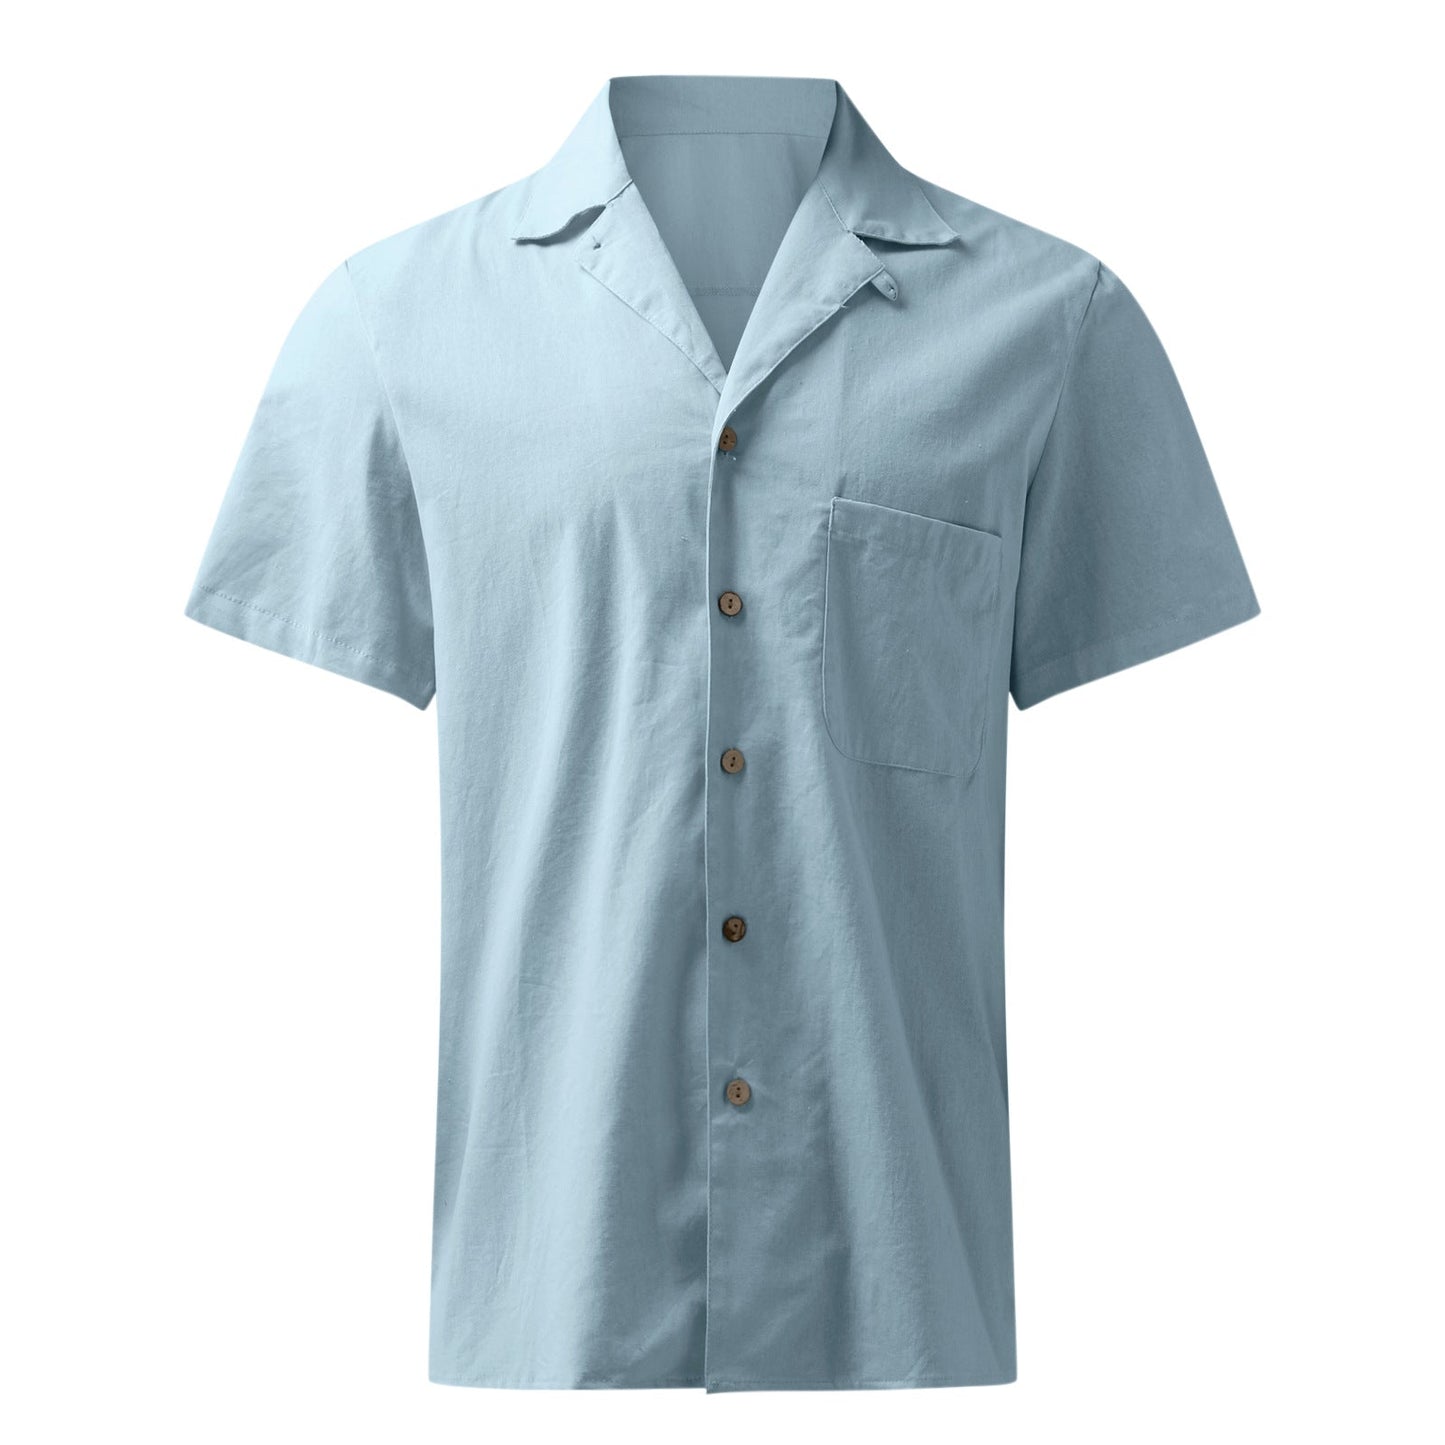 Casual Linen Short Sleeves Shirts for Men-Shirts & Tops-Light Blue-S-Free Shipping Leatheretro